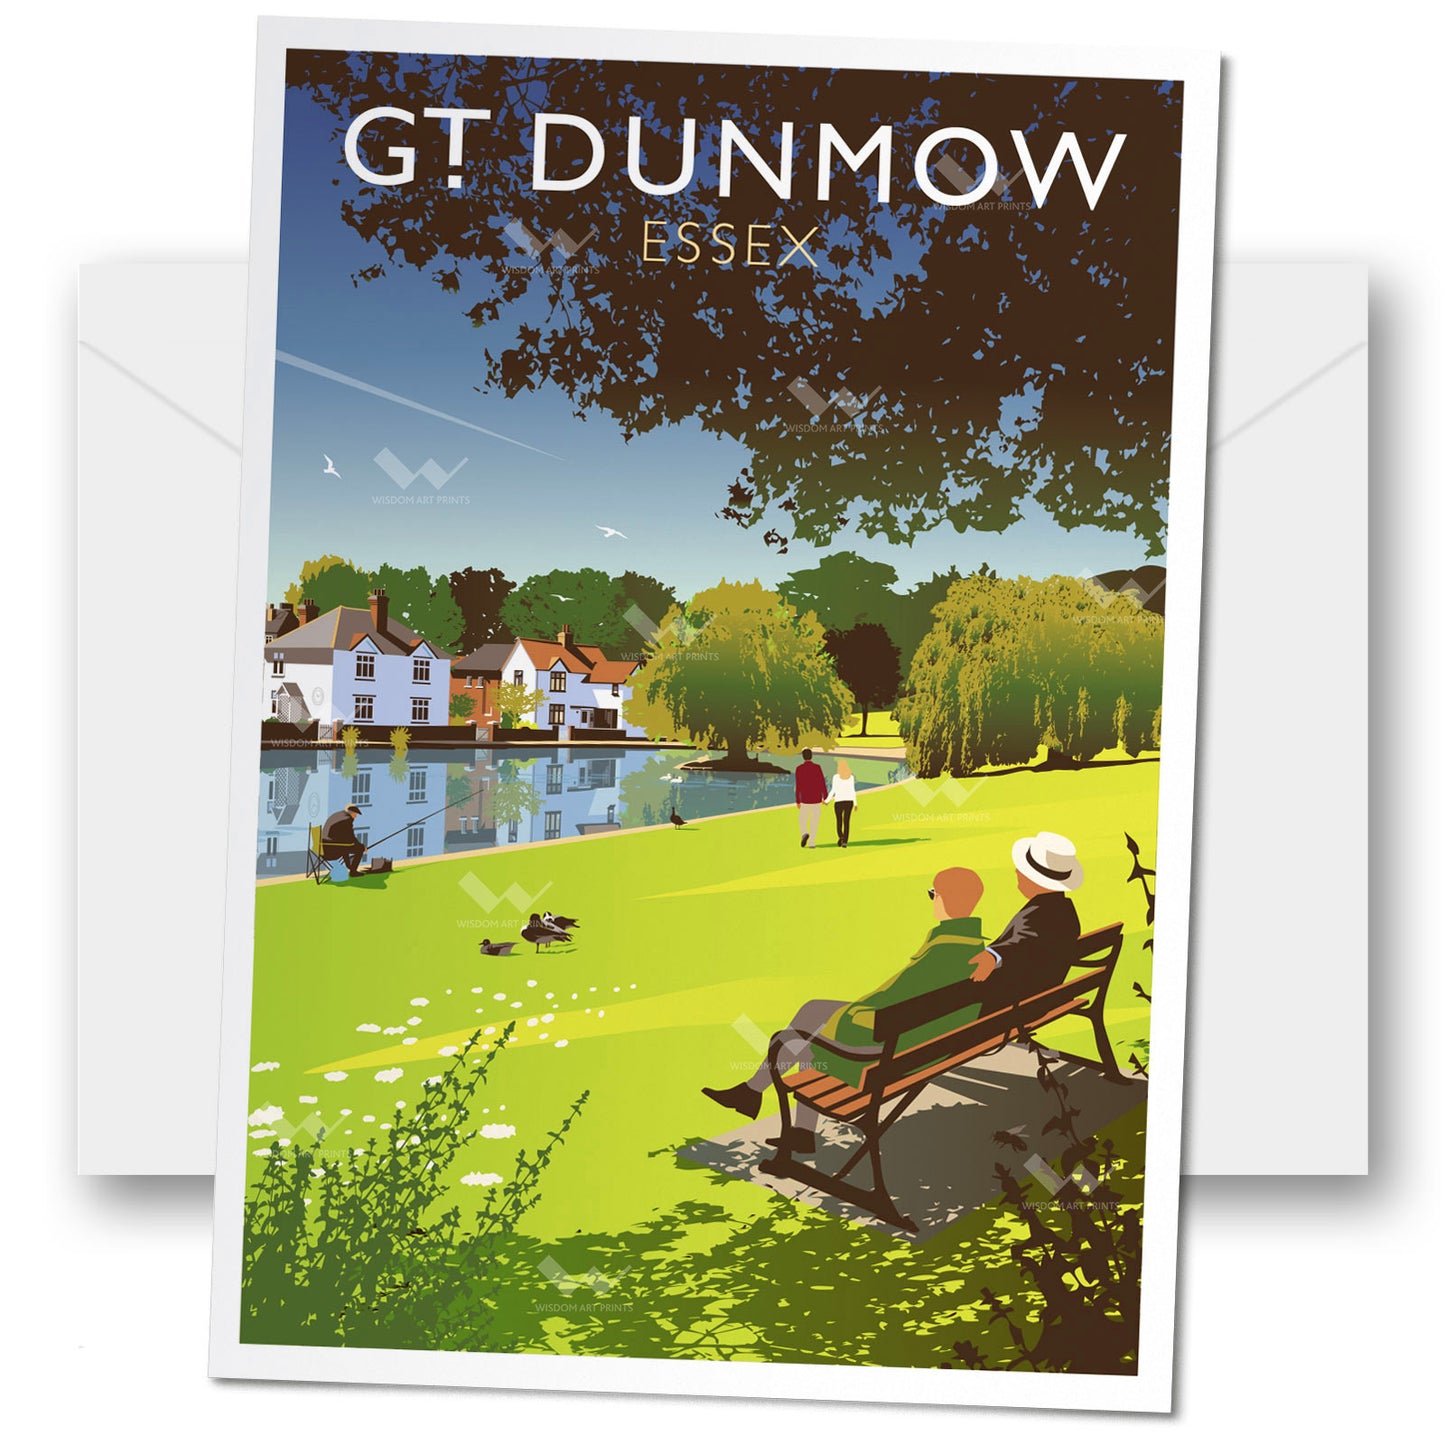 Great Dunmow, Essex Greeting Card